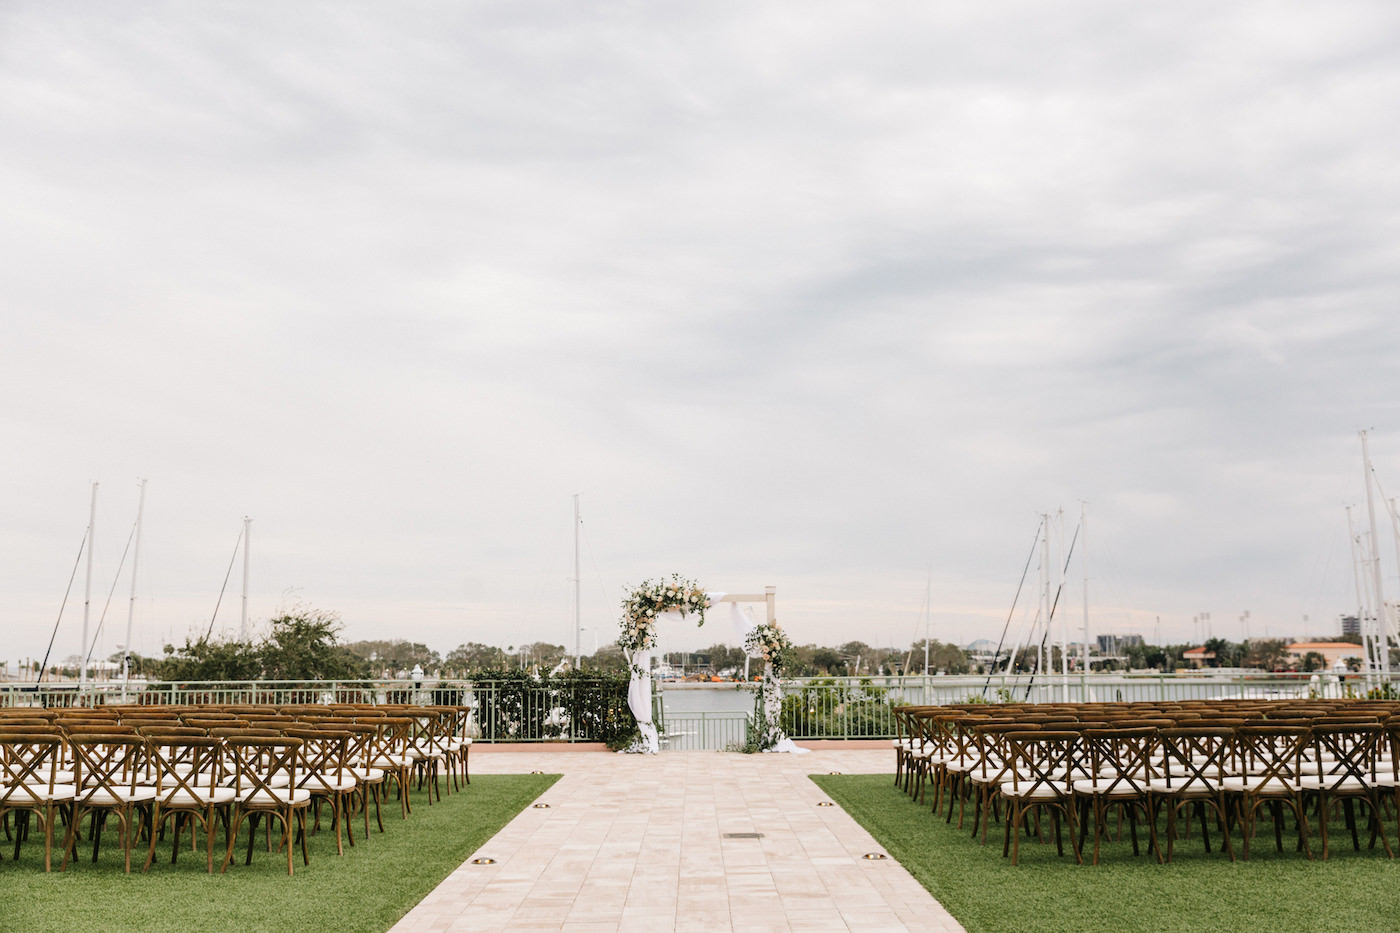 Boho Chic Outdoor Waterfront Ceremony, Wooden Cross back Chairs, Altar with White Linen Draping, Decorated with Lush Ivory Flowers and Blush Pink Roses, Pampas Grass Bouquets with Greenery | The Esplanade Location of the Vinoy Renaissance Resort in Downtown St. Petersburg | Tampa Bay Luxury Wedding Planner Parties A’ La Carte | Rentals A Chair Affair and Over the Top Linens